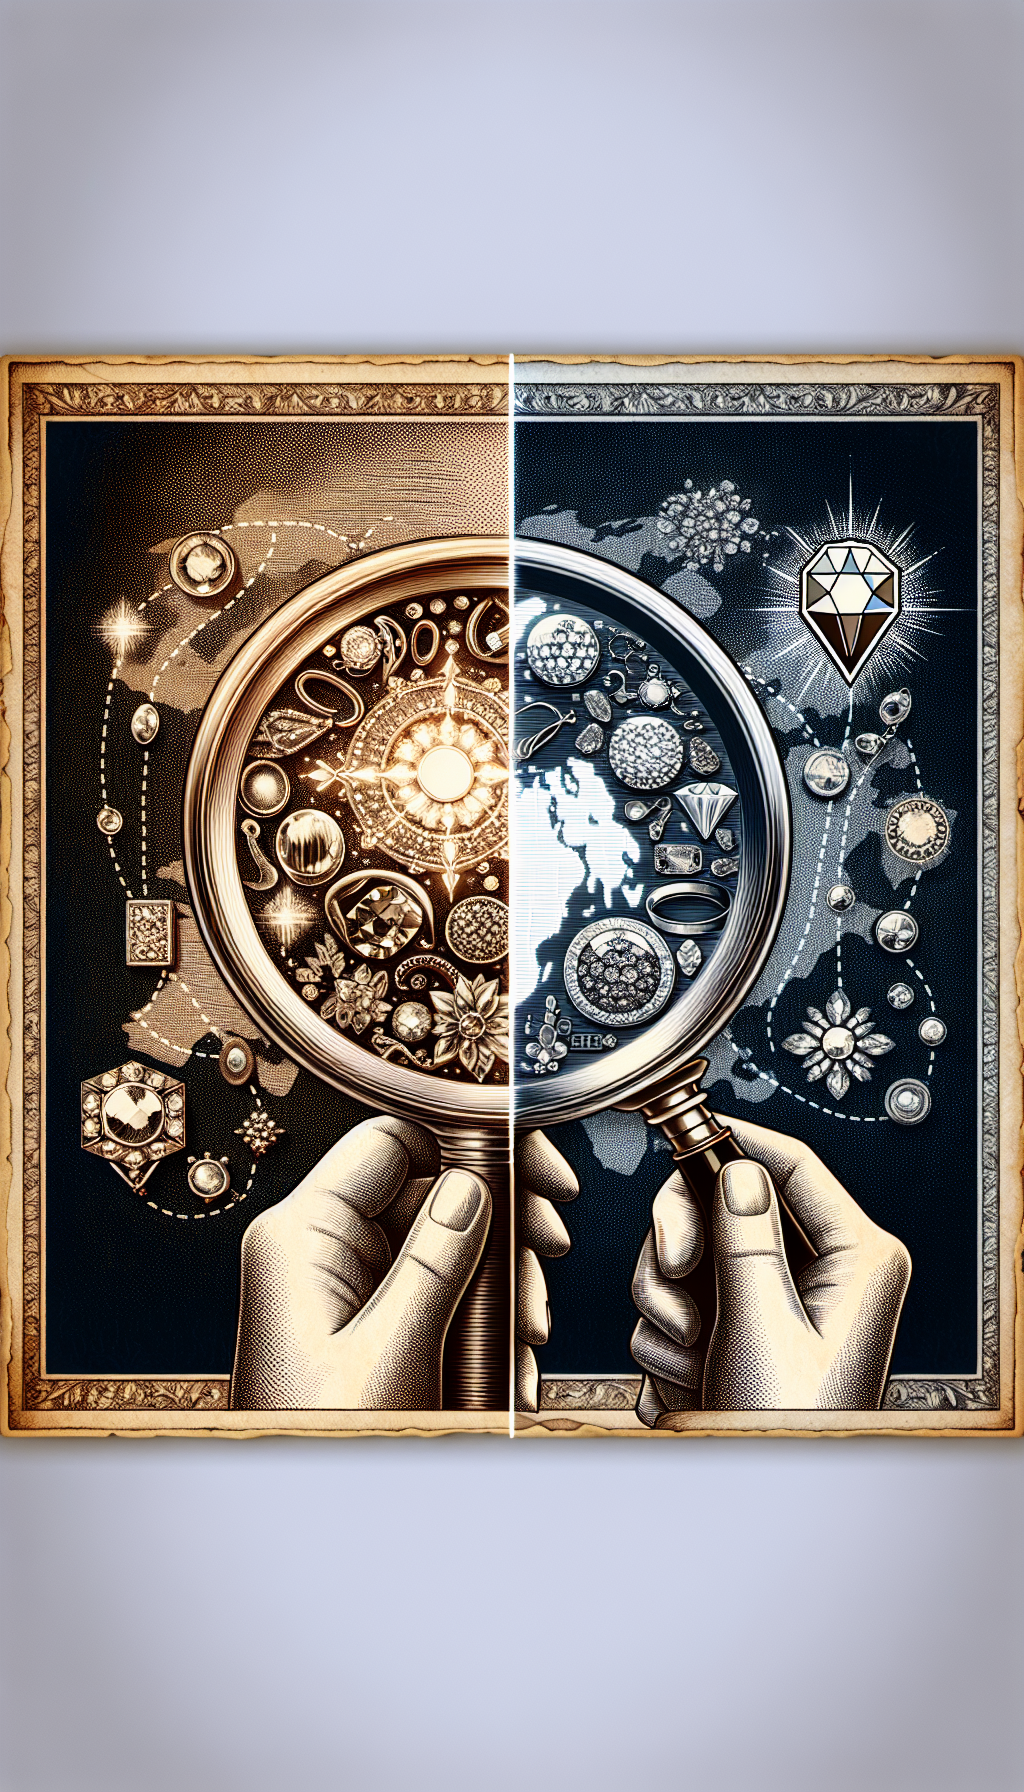 An intricate border frames an illustration where a magnifying glass reveals two worlds: one side showcases shimmering antique jewelry under expert scrutiny, while the other displays mundane trinkets. A subtle map overlay pinpoints the appraiser's location with a sparkling gem icon, suggesting the proximity of antique jewelry appraisal services. The contrast in style between the radiant treasures and the dull trinkets emphasizes the expertise involved in appraisal.